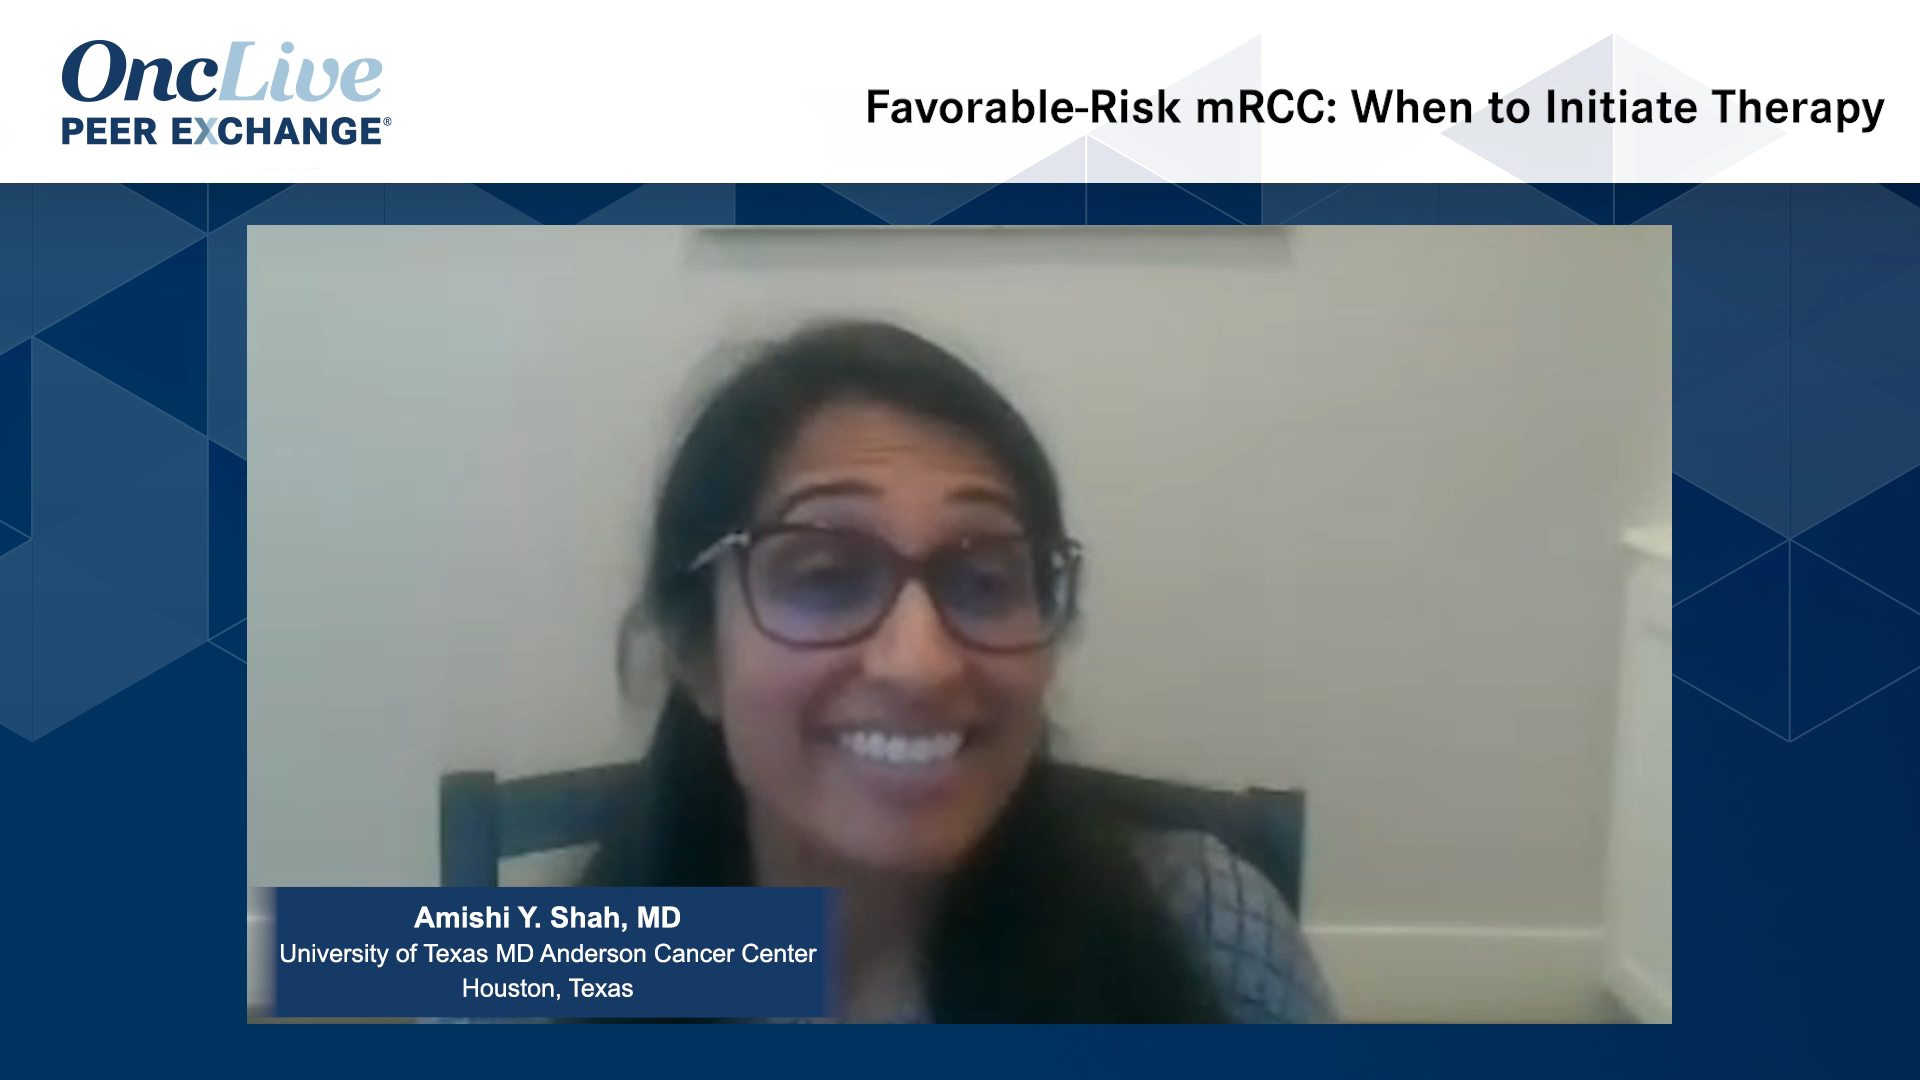 Favorable-Risk mRCC: When to Initiate Therapy